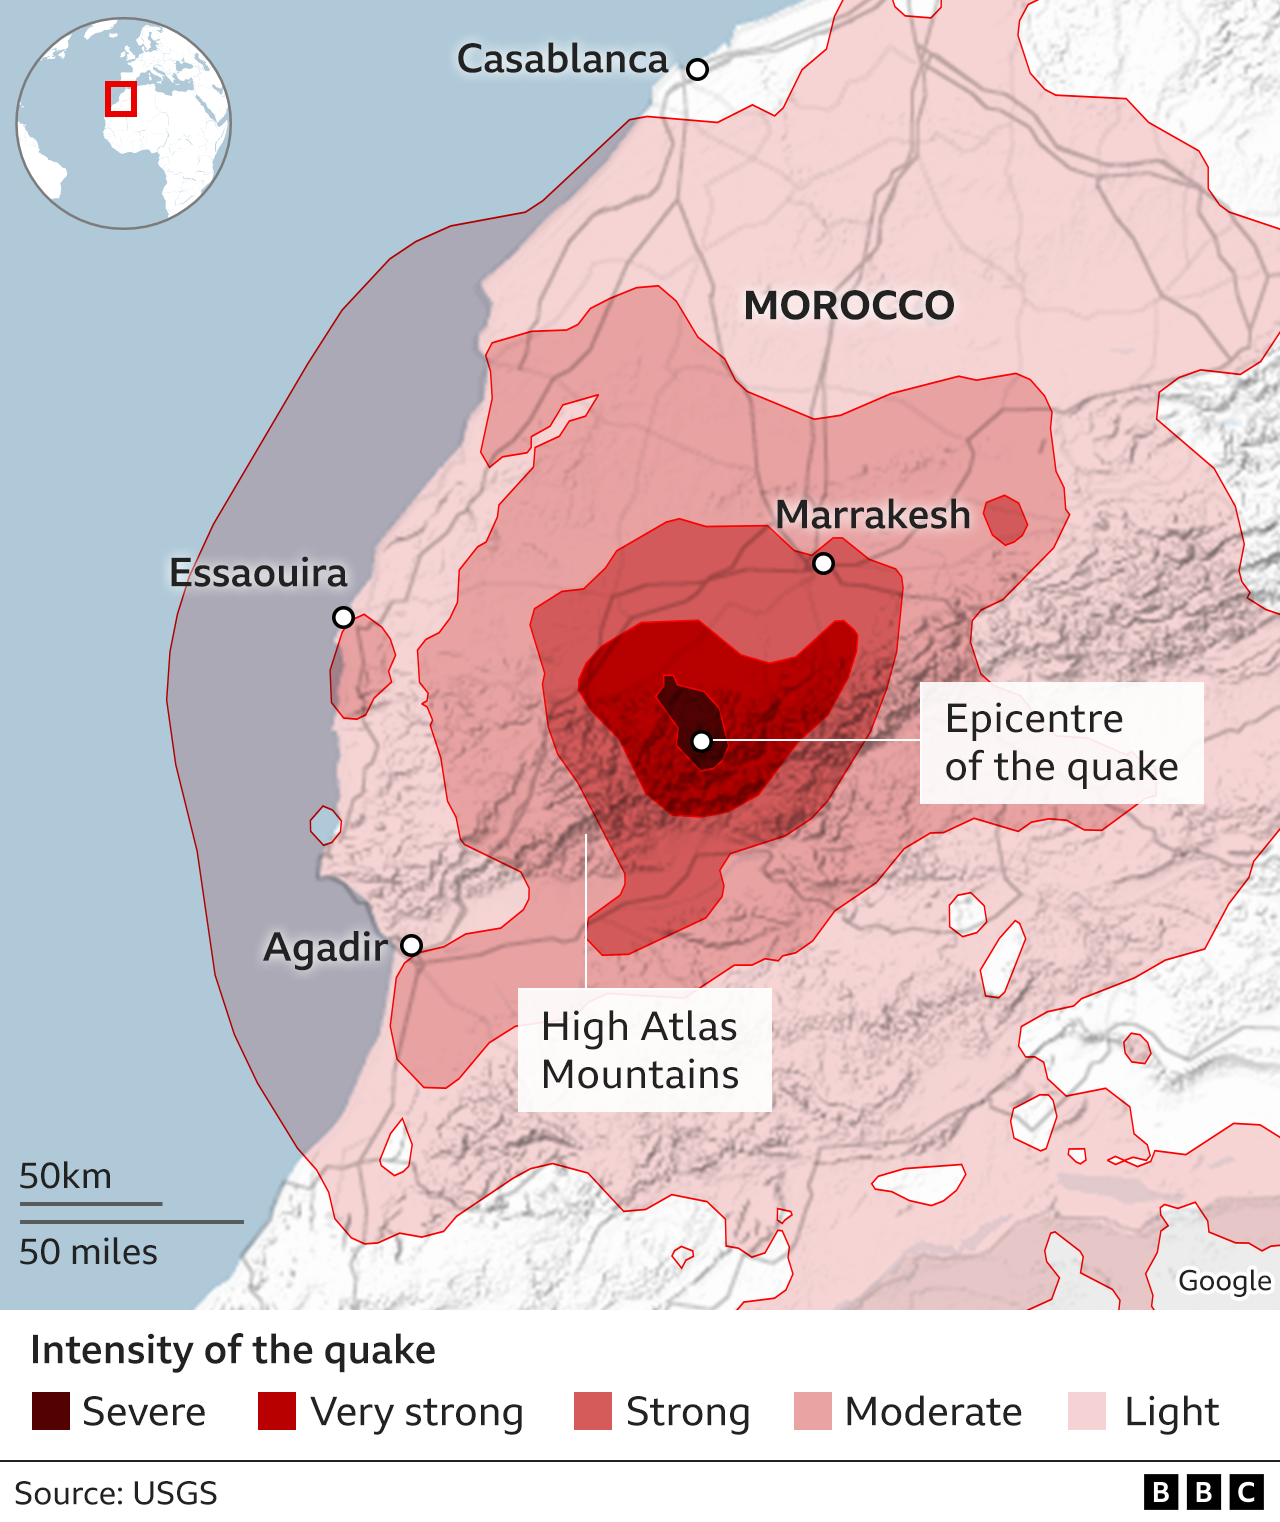 Map of Morocco showing the intensity of shaking as it would have been felt, radiating out from the epicentre of the earthquake.